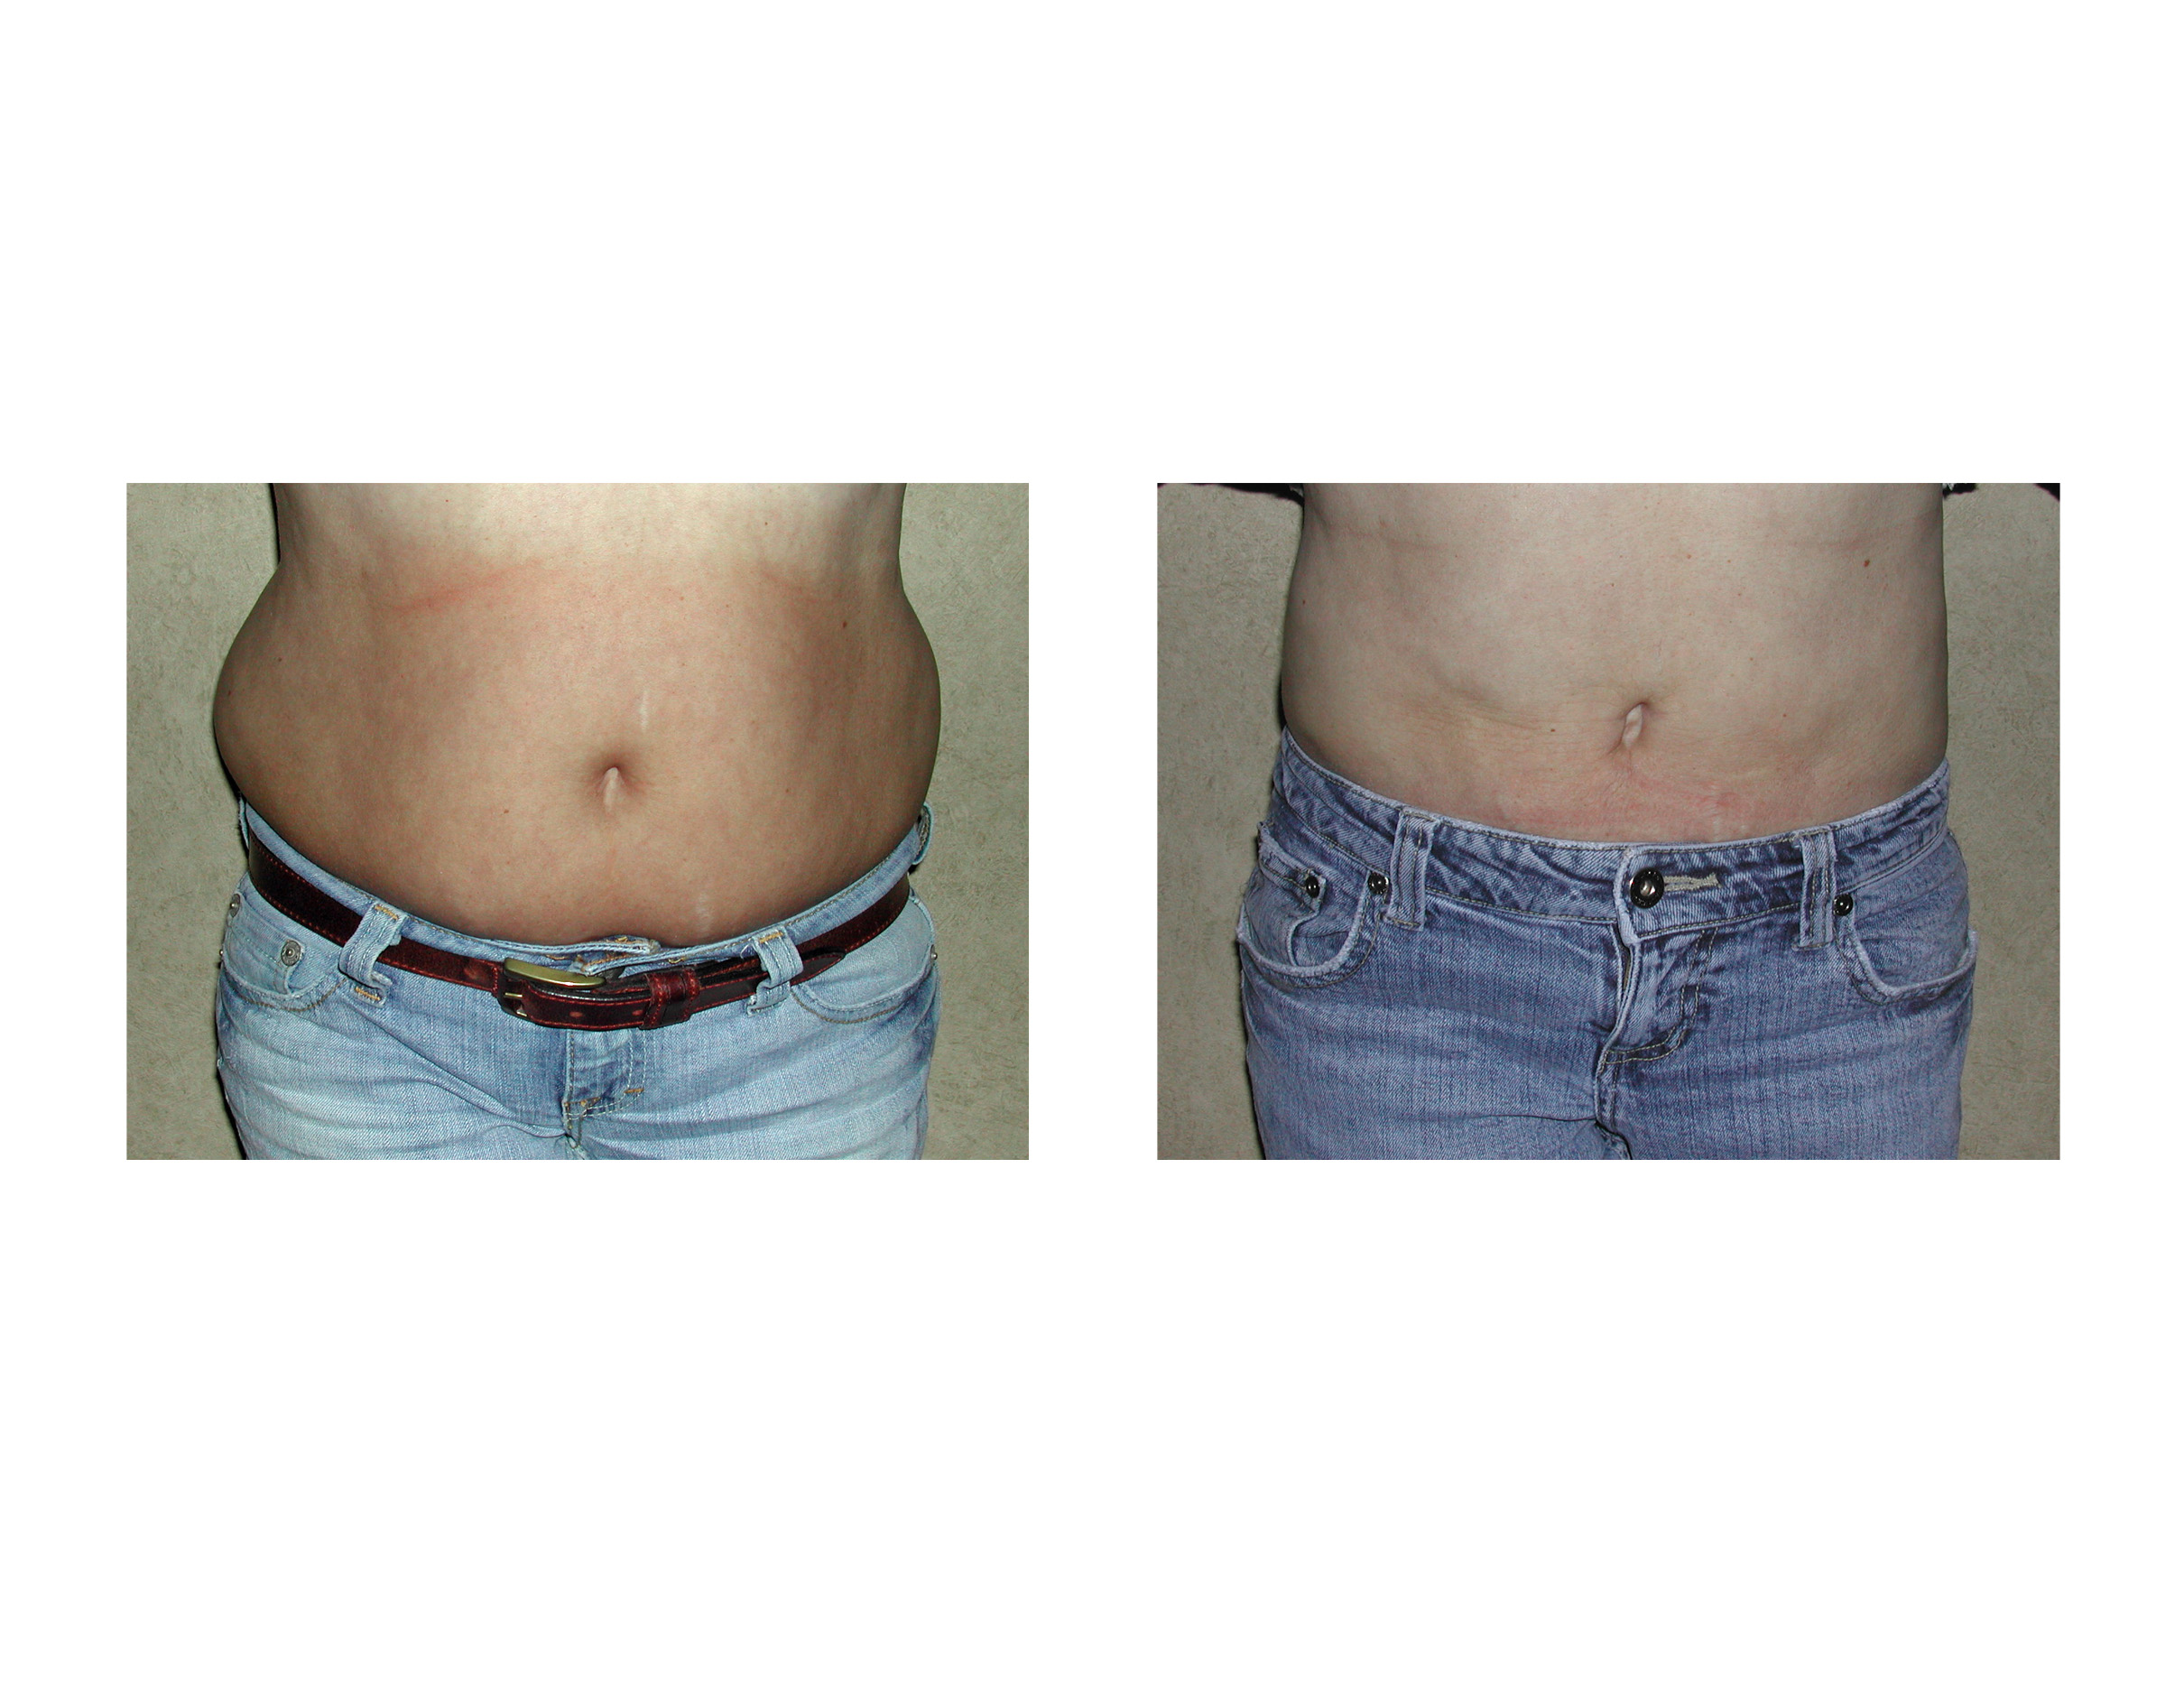 https://exploreplasticsurgery.com/wp-content/uploads/2010/12/liposuction-for-muffin-tops-dr-barry-eppley-indianapolis.jpg